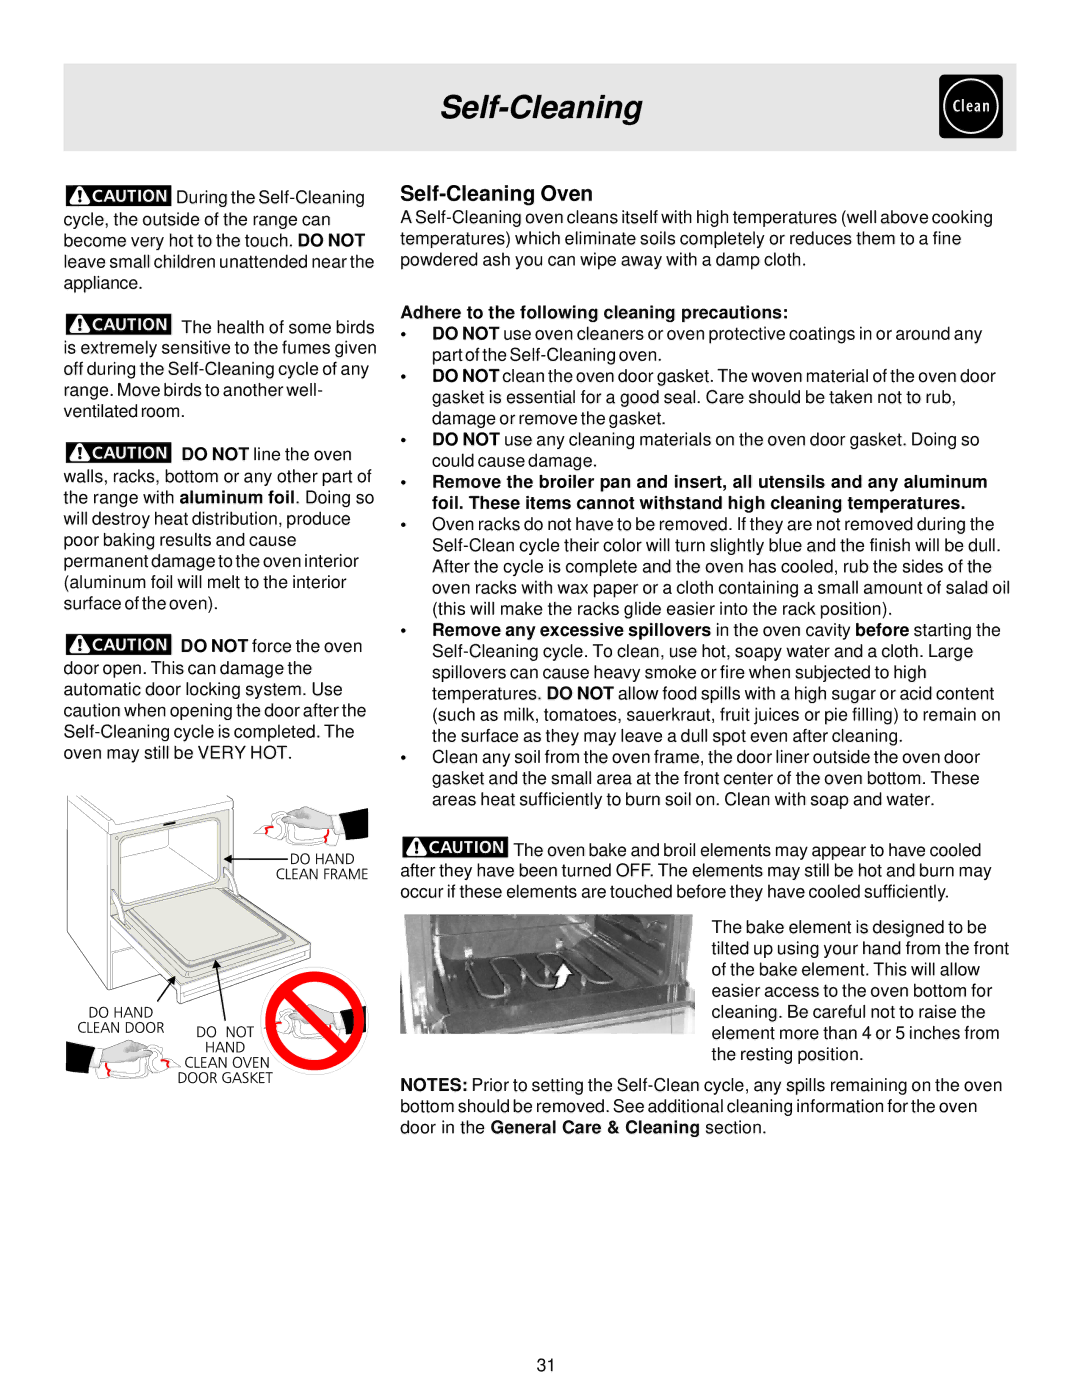 Electrolux ES510 important safety instructions Self-Cleaning Oven, Adhere to the following cleaning precautions 